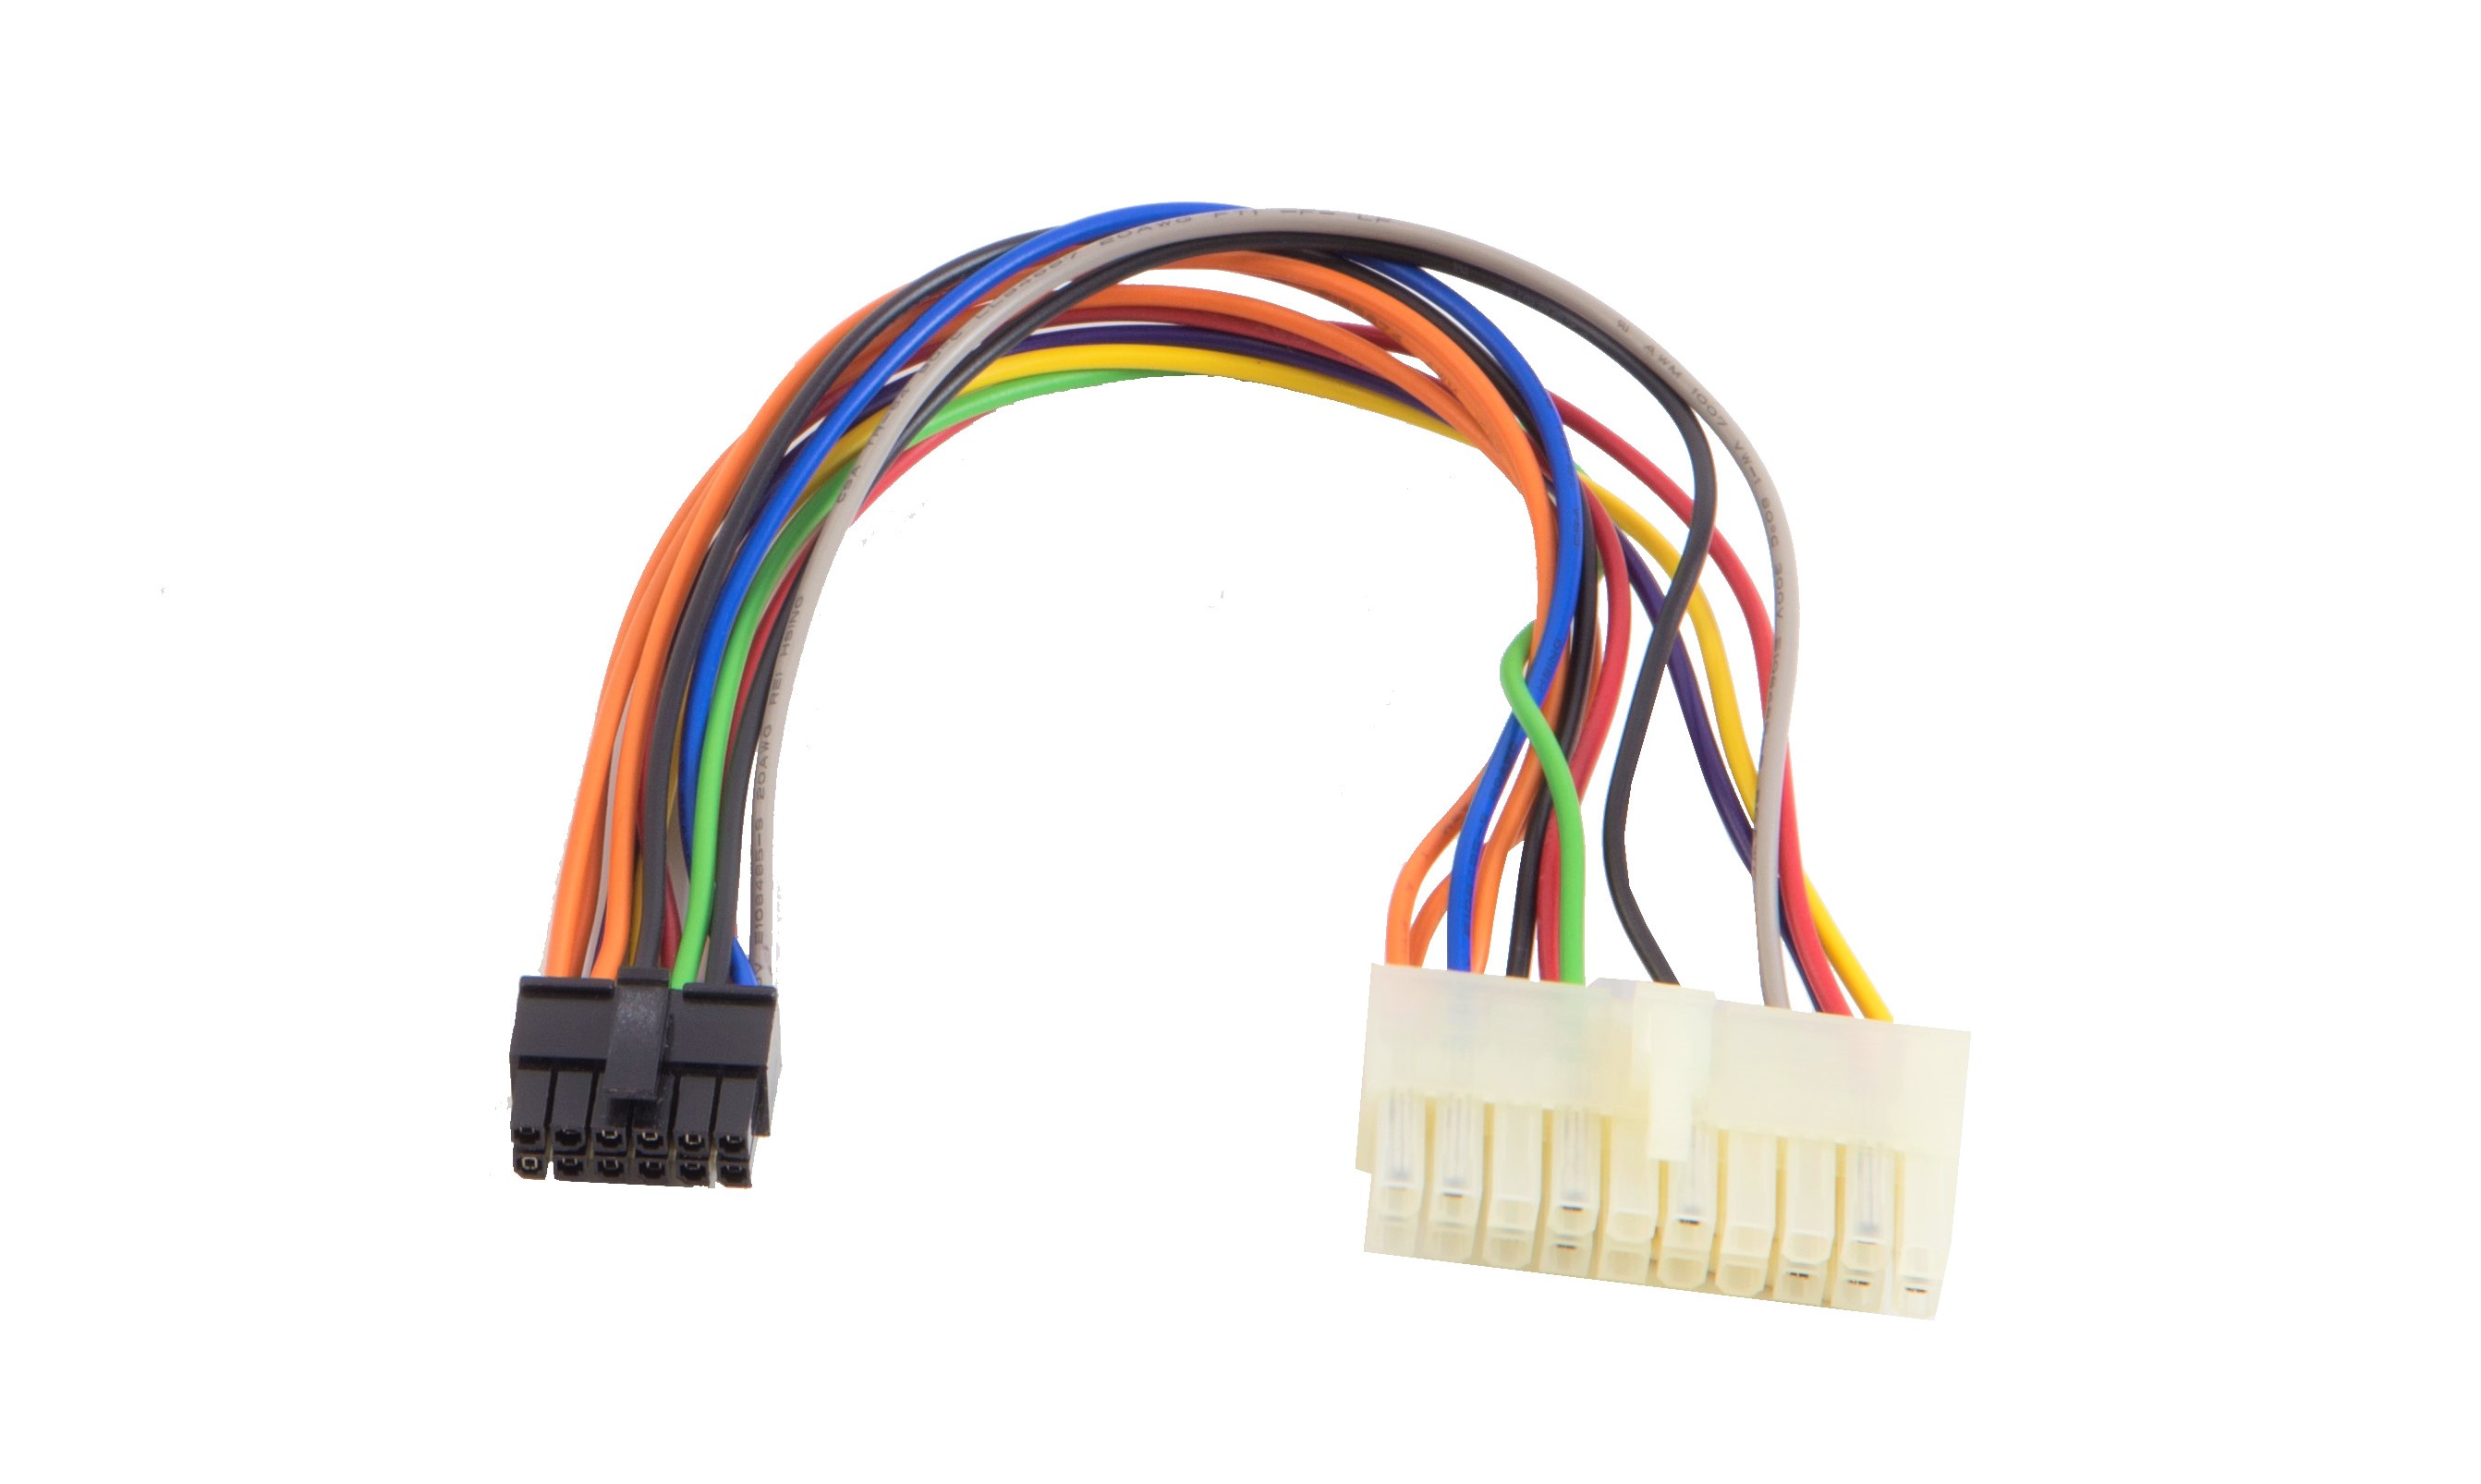 12-20 ATX CABLE  |Products|Accessories|Cable & Cord